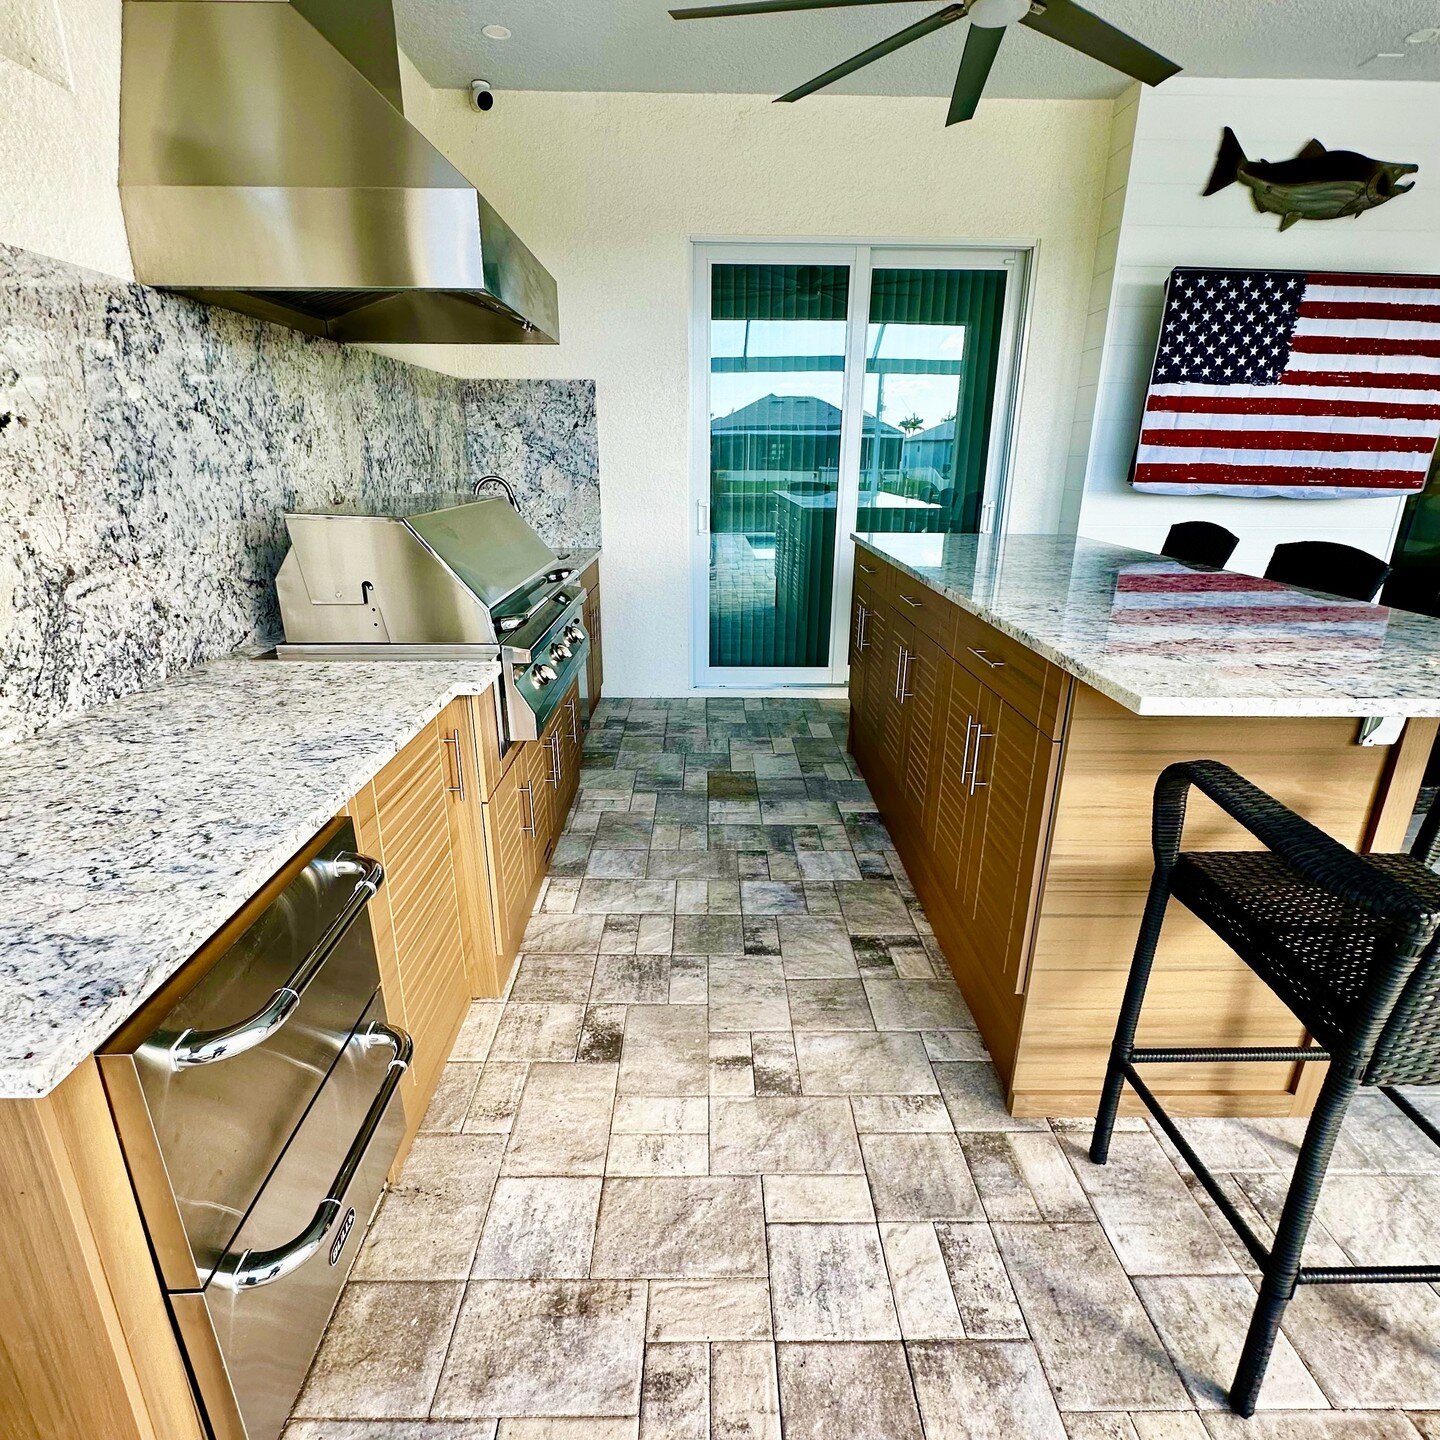 Custom outdoor kitchen and pocket wall for TV. 

Call us for your next project 239-235-1818 

#swflrealestate #swflhomes #swflcontractor #marcoisland